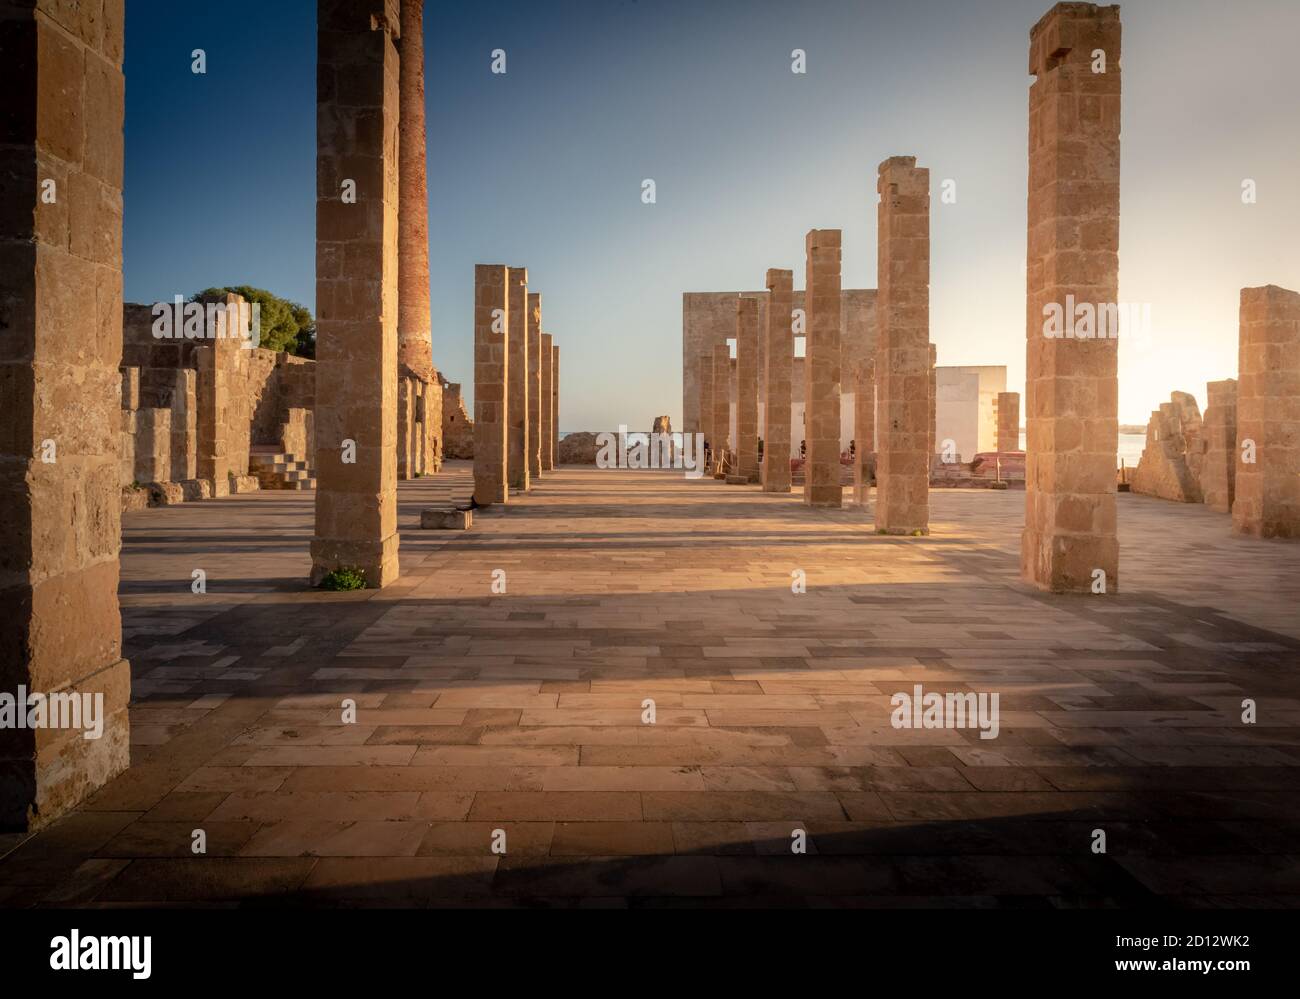 Shot of the ruins of the ancient building Tonnara di Vendicari. The building was used in the past as a workplace for tuna fishing. The place is now ab Stock Photo